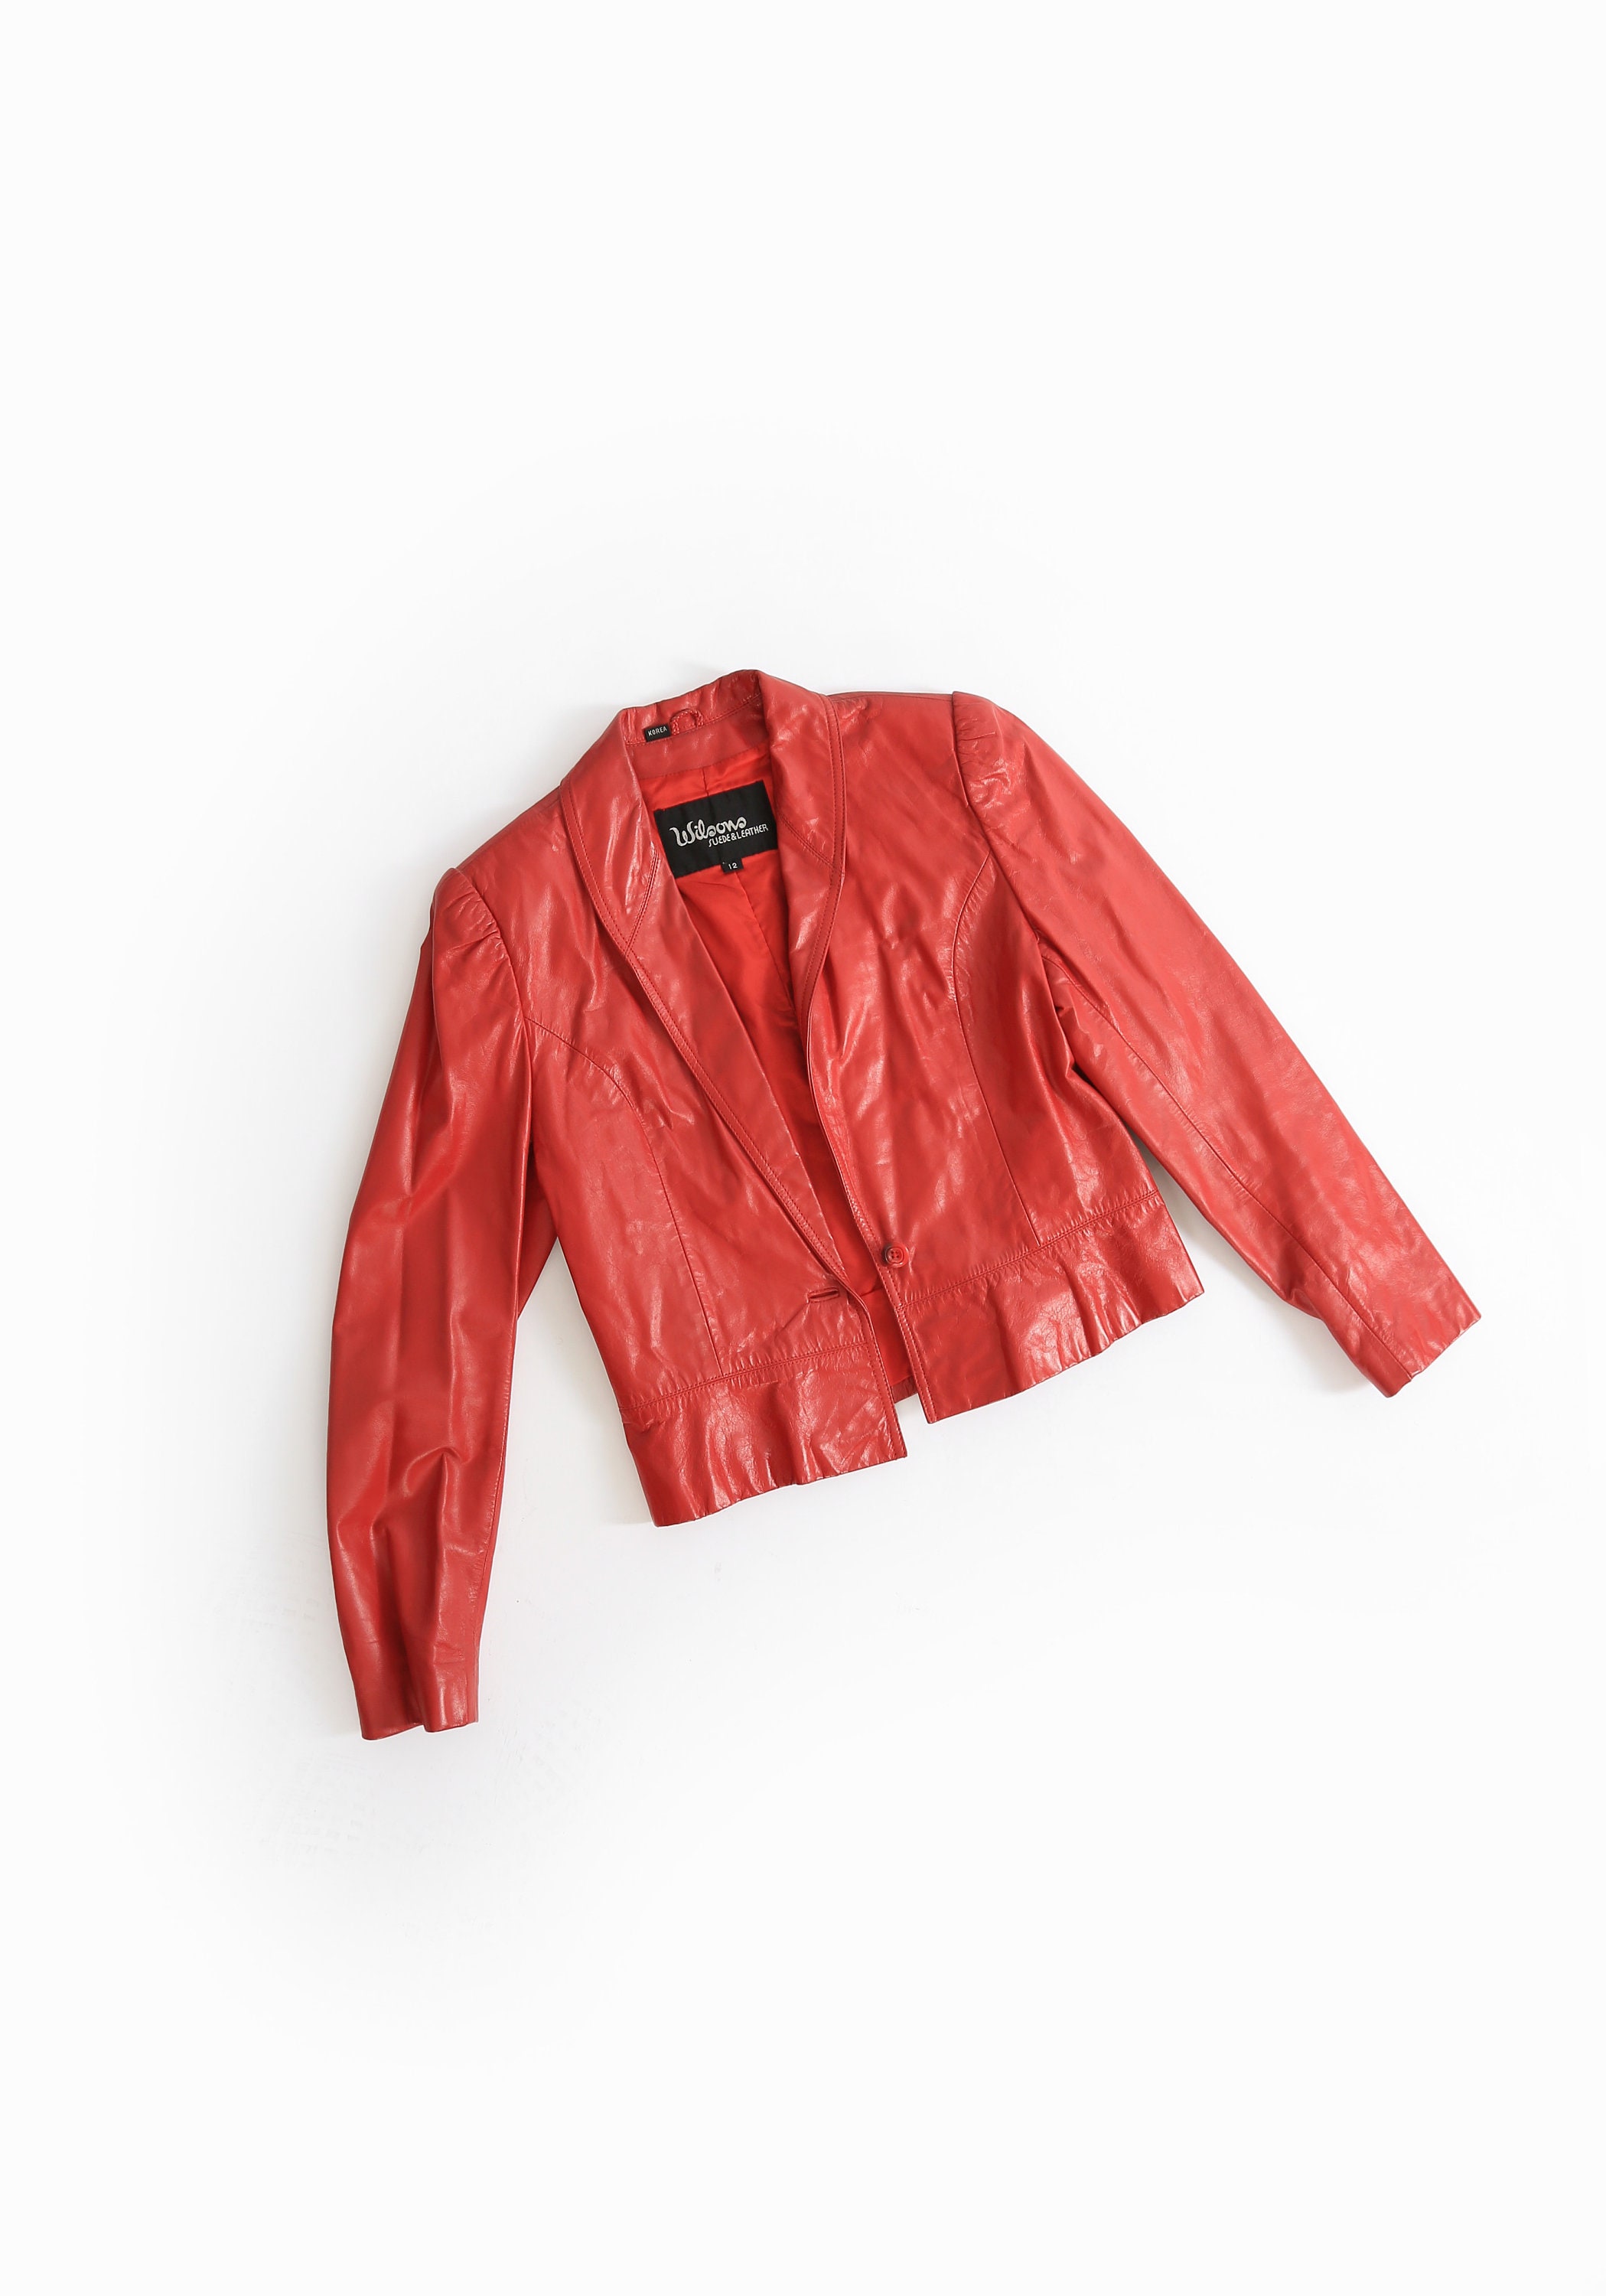 Wilsons Red Leather Jacket - Etsy